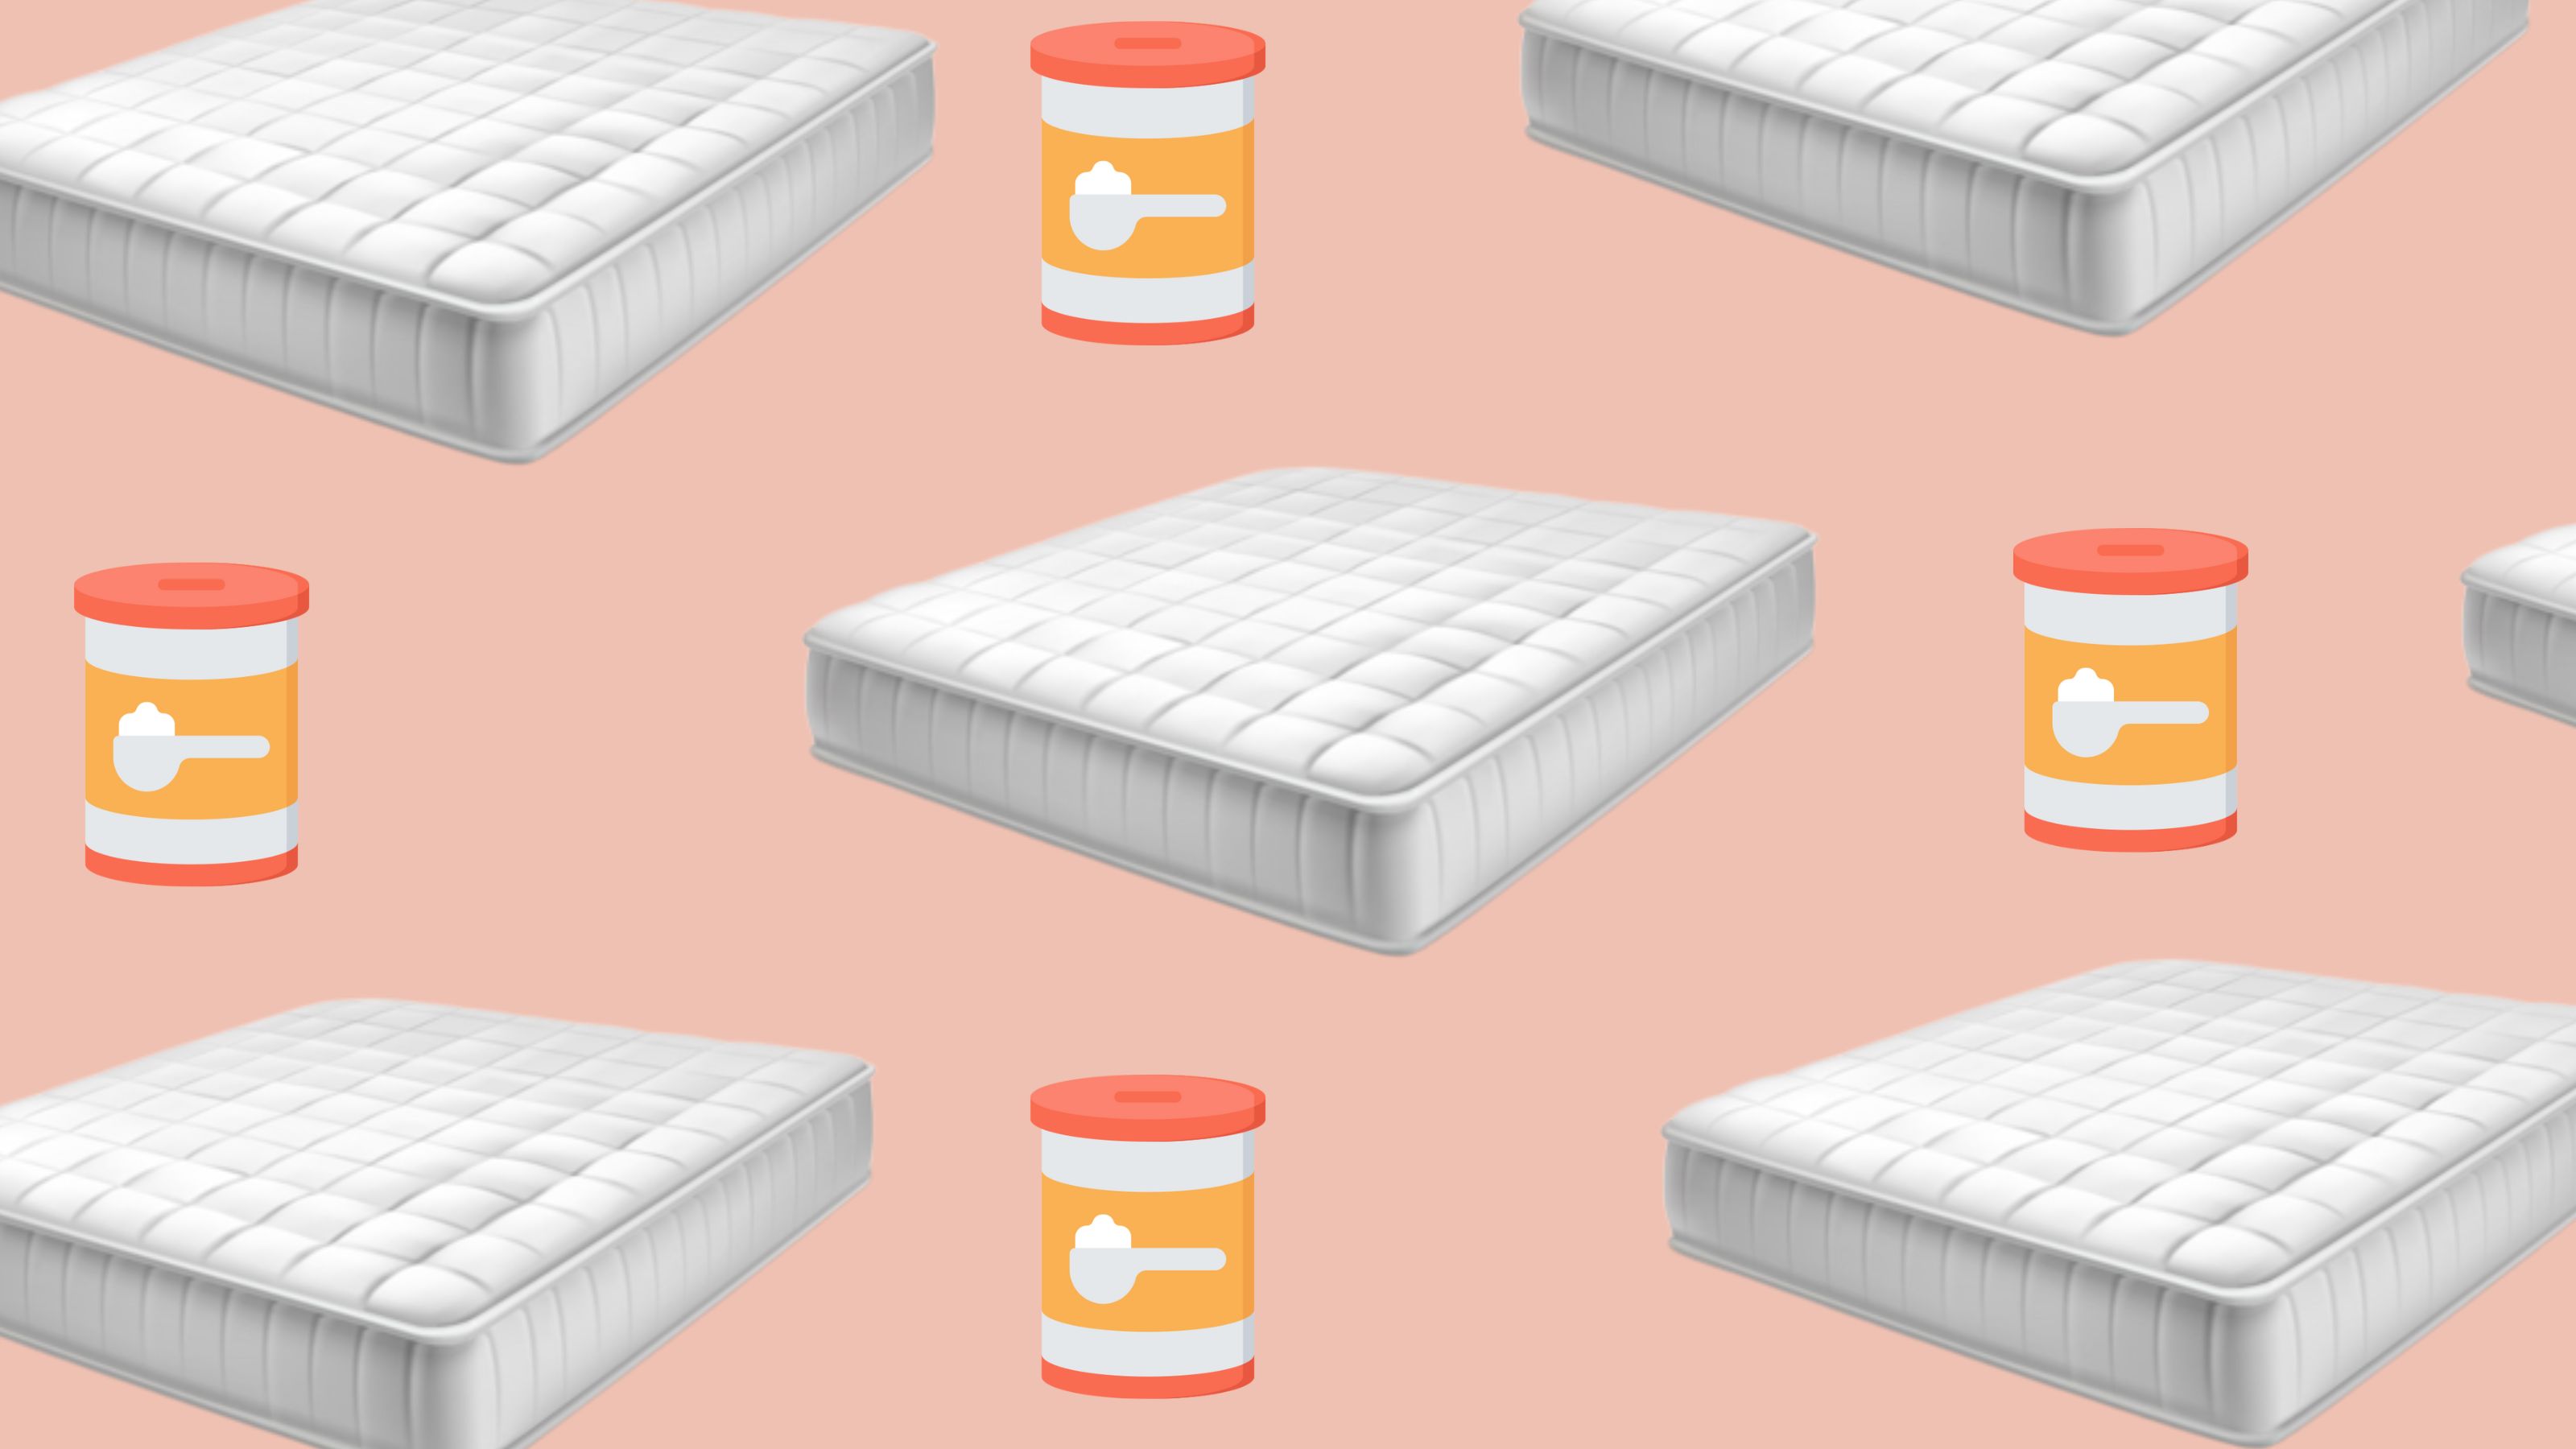 Never Cleaned Your Mattress? Try These Mattress Cleaning